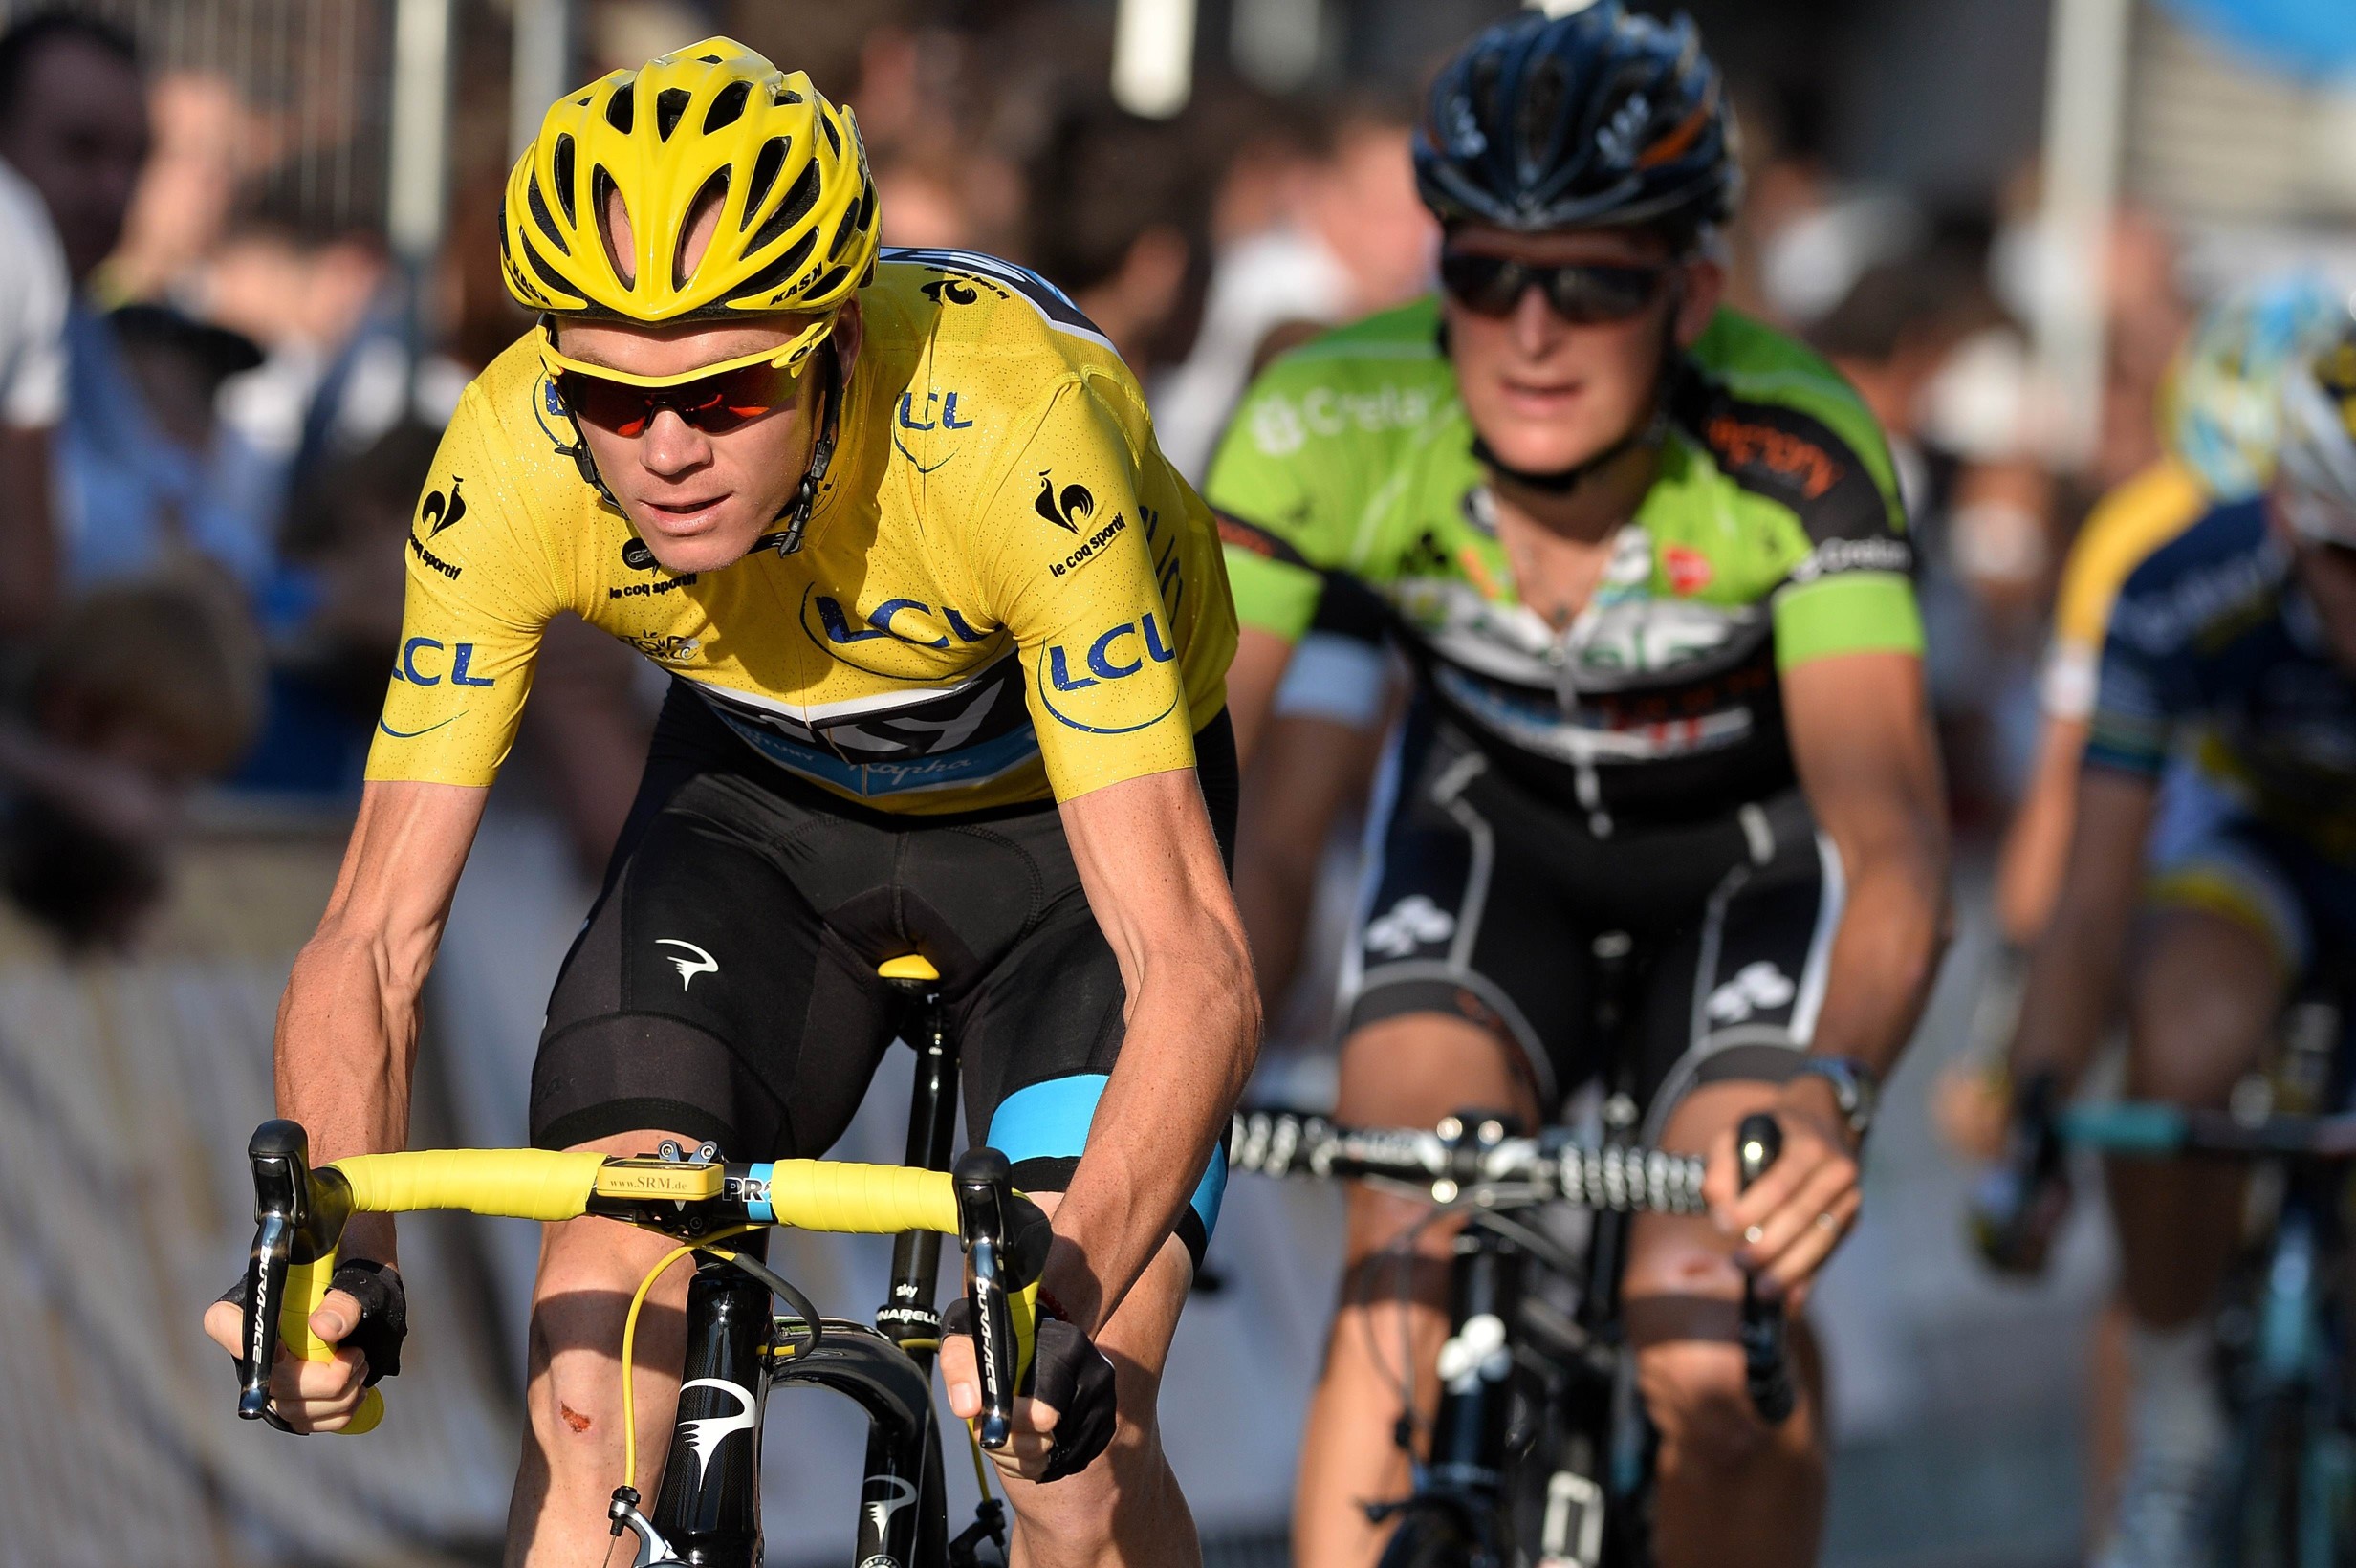 British cyclist Chris Froome (left). This year the Tour de France has had no positive drug test results. Photo: AFP